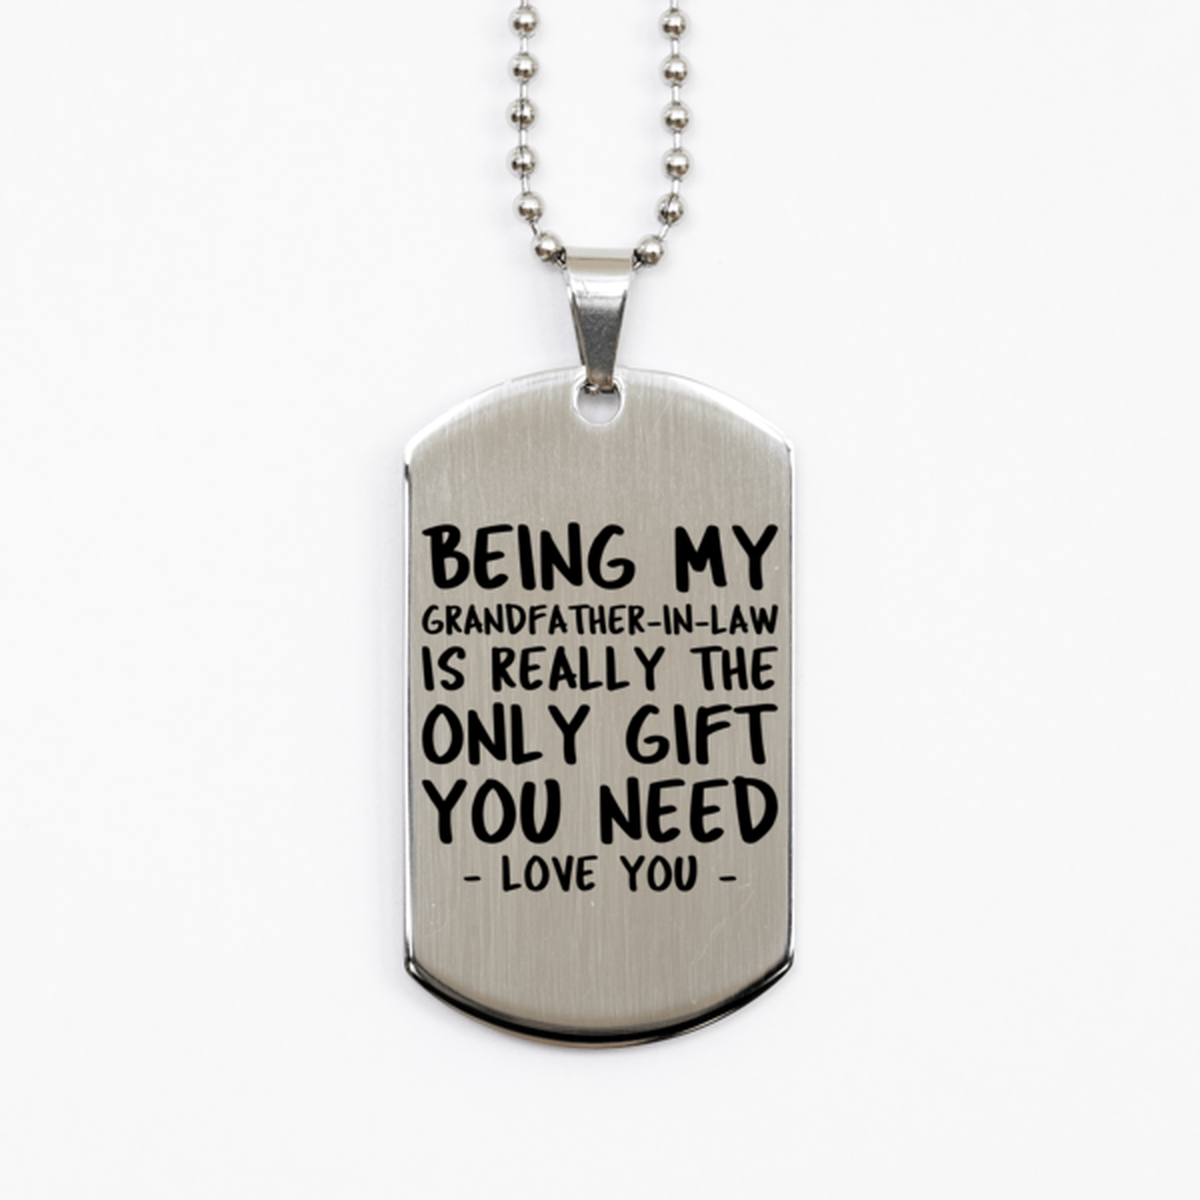 Funny Grandfather-in-law Silver Dog Tag Necklace, Being My Grandfather-in-law Is Really the Only Gift You Need, Best Birthday Gifts for Grandfather-in-law